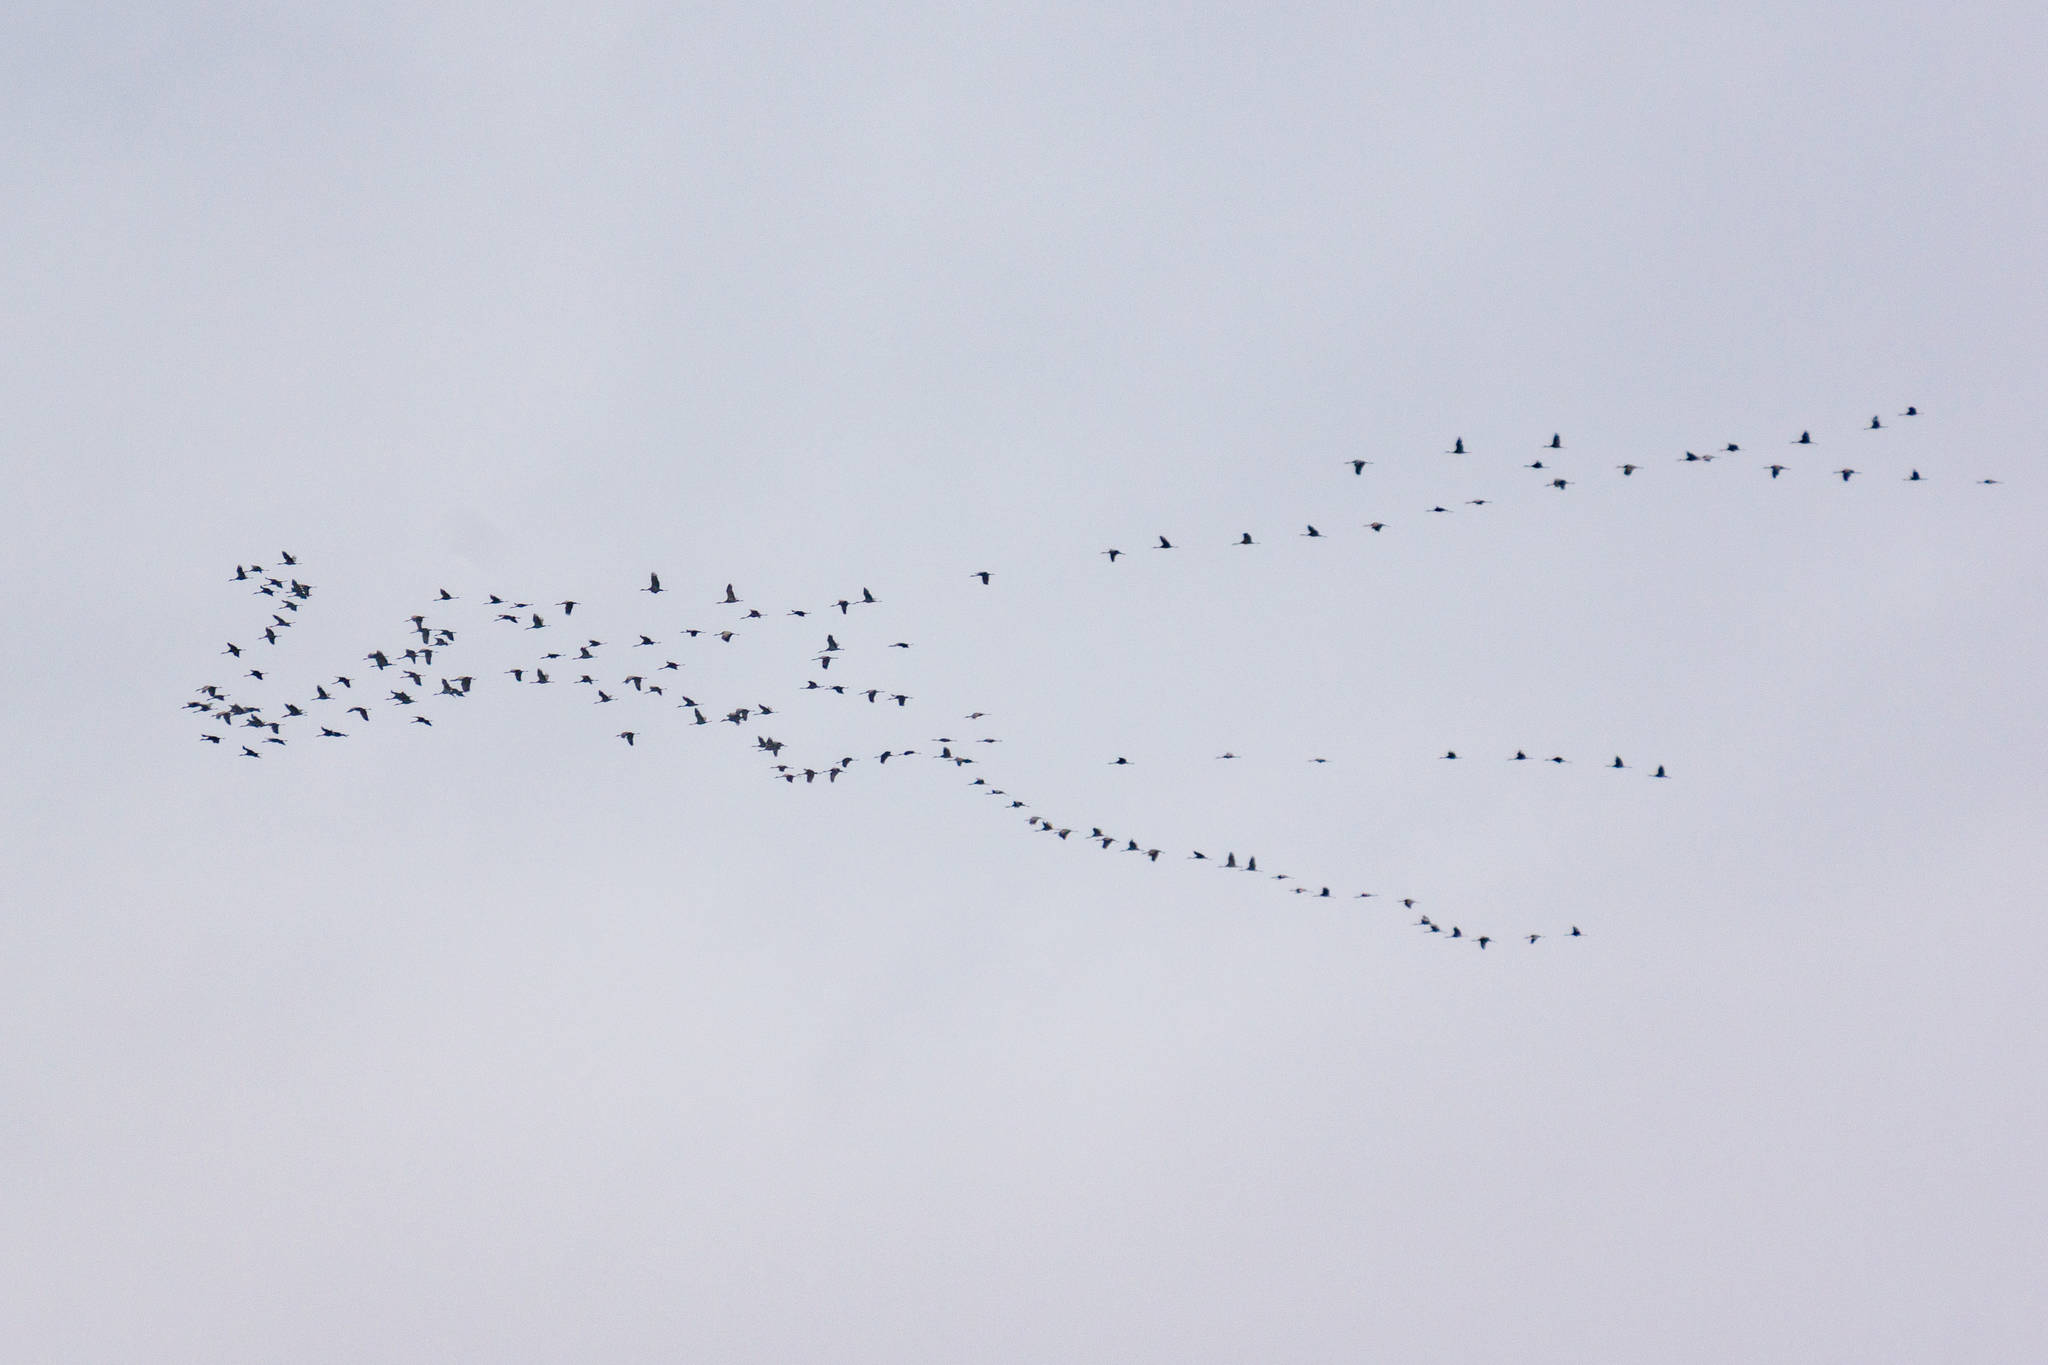 Birds in flight over the Mendenhall Wetlands. (Photo by Gabe Donohoe)